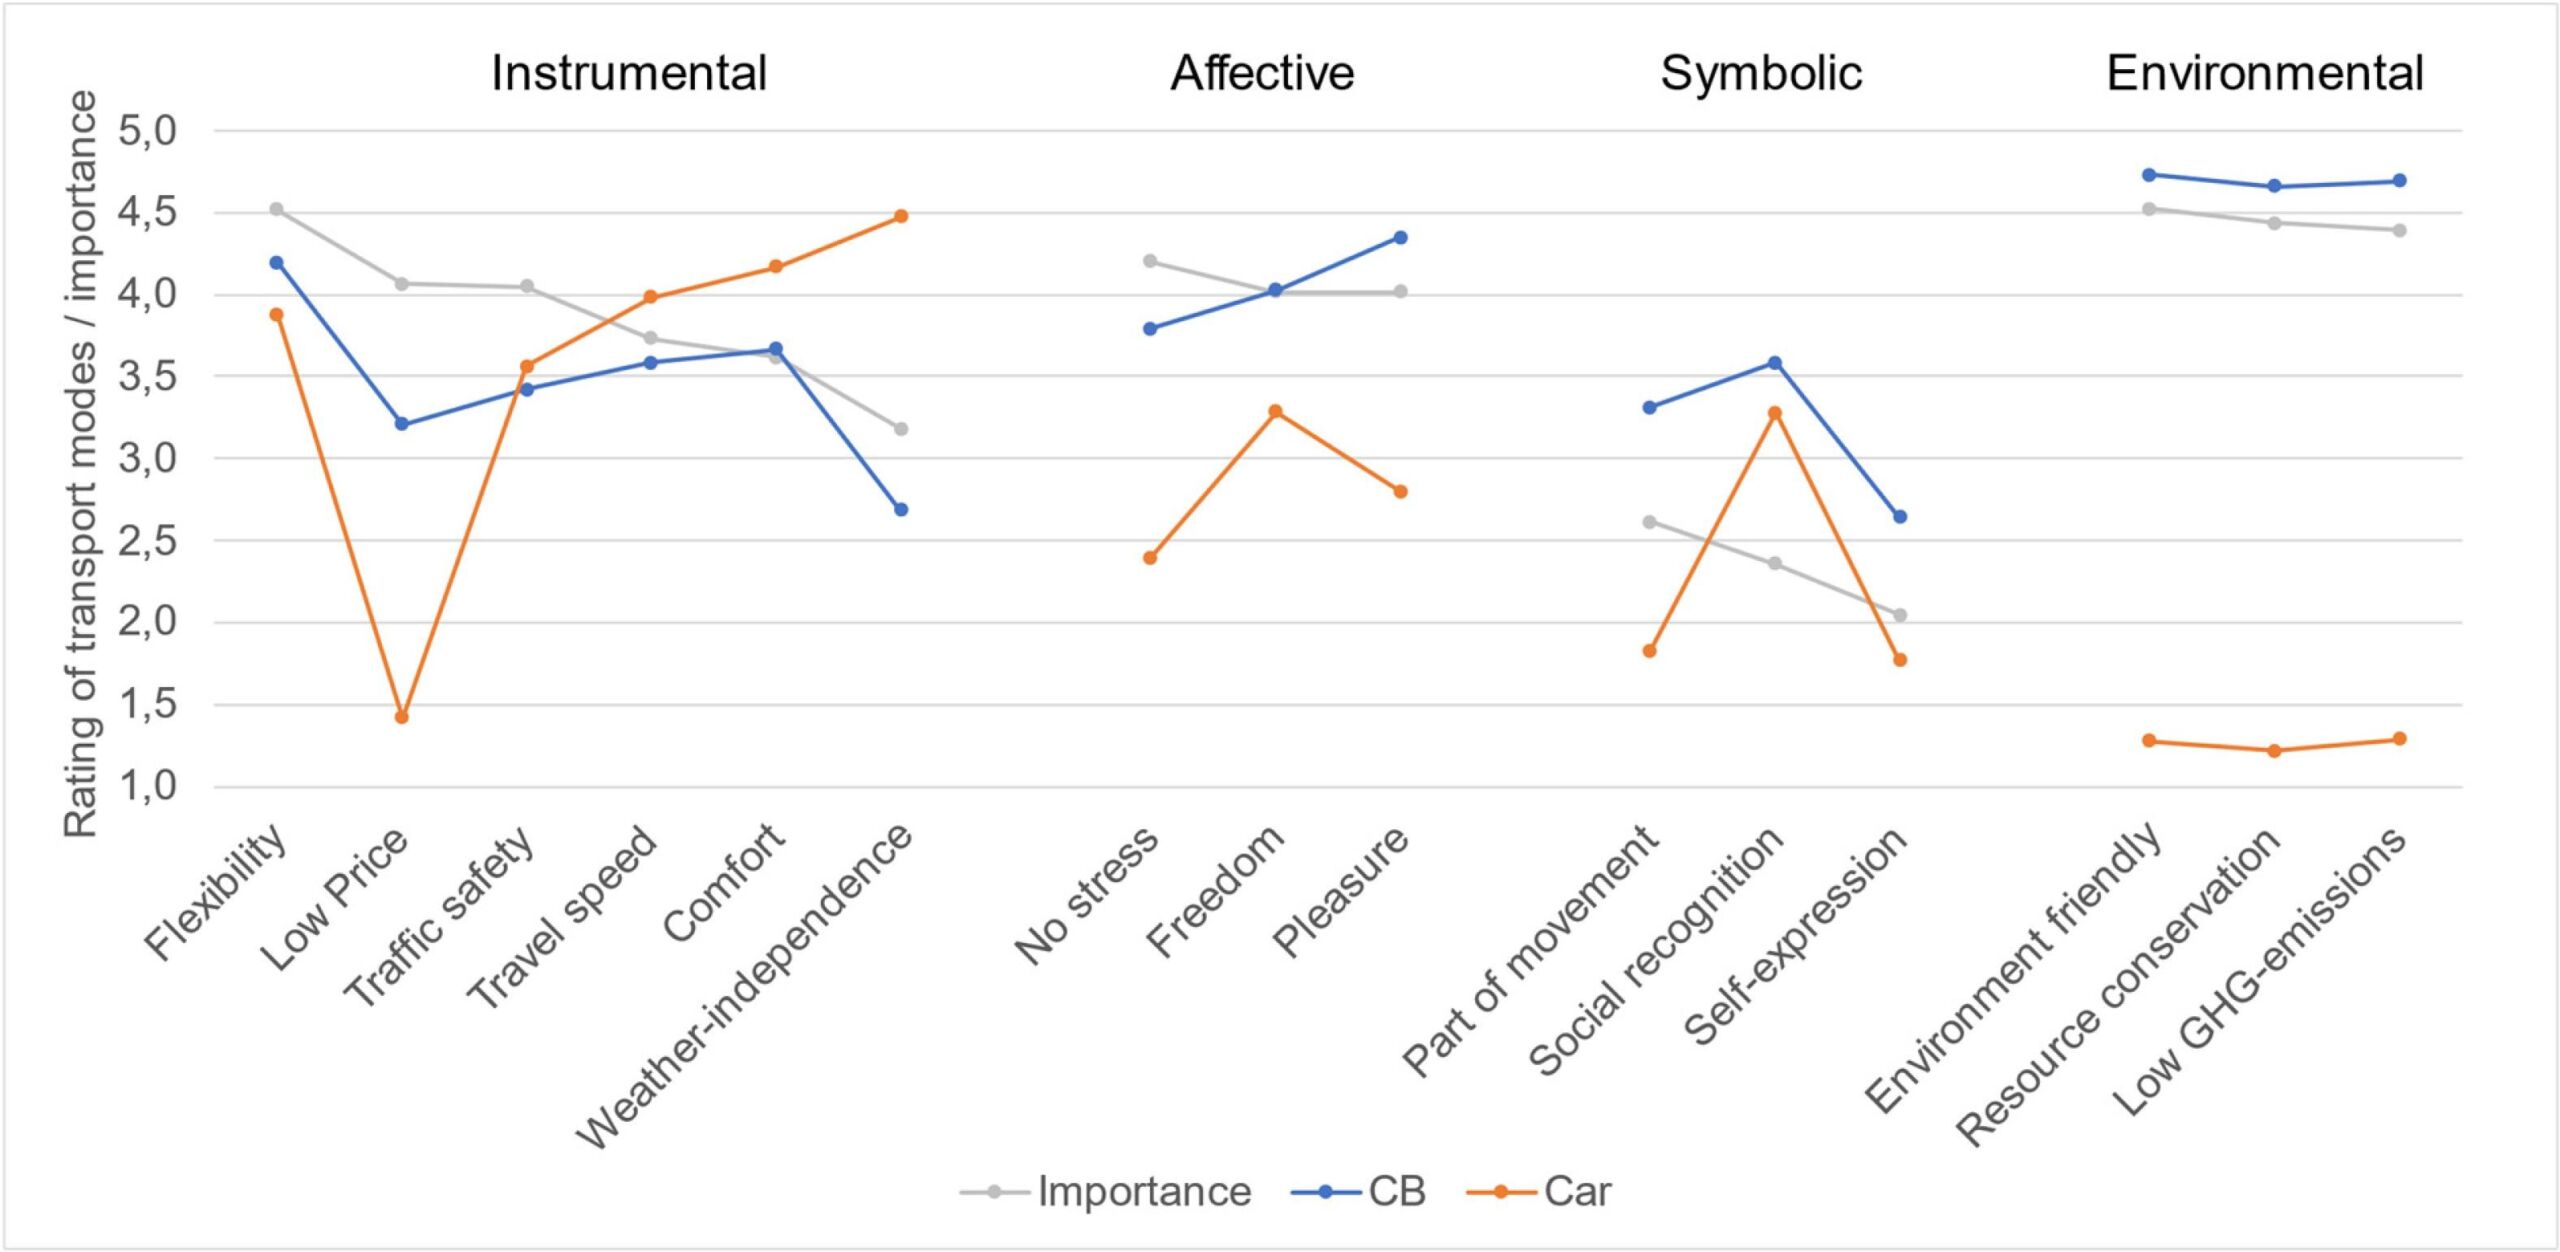 Ratings of cargo bikes and cars across different 